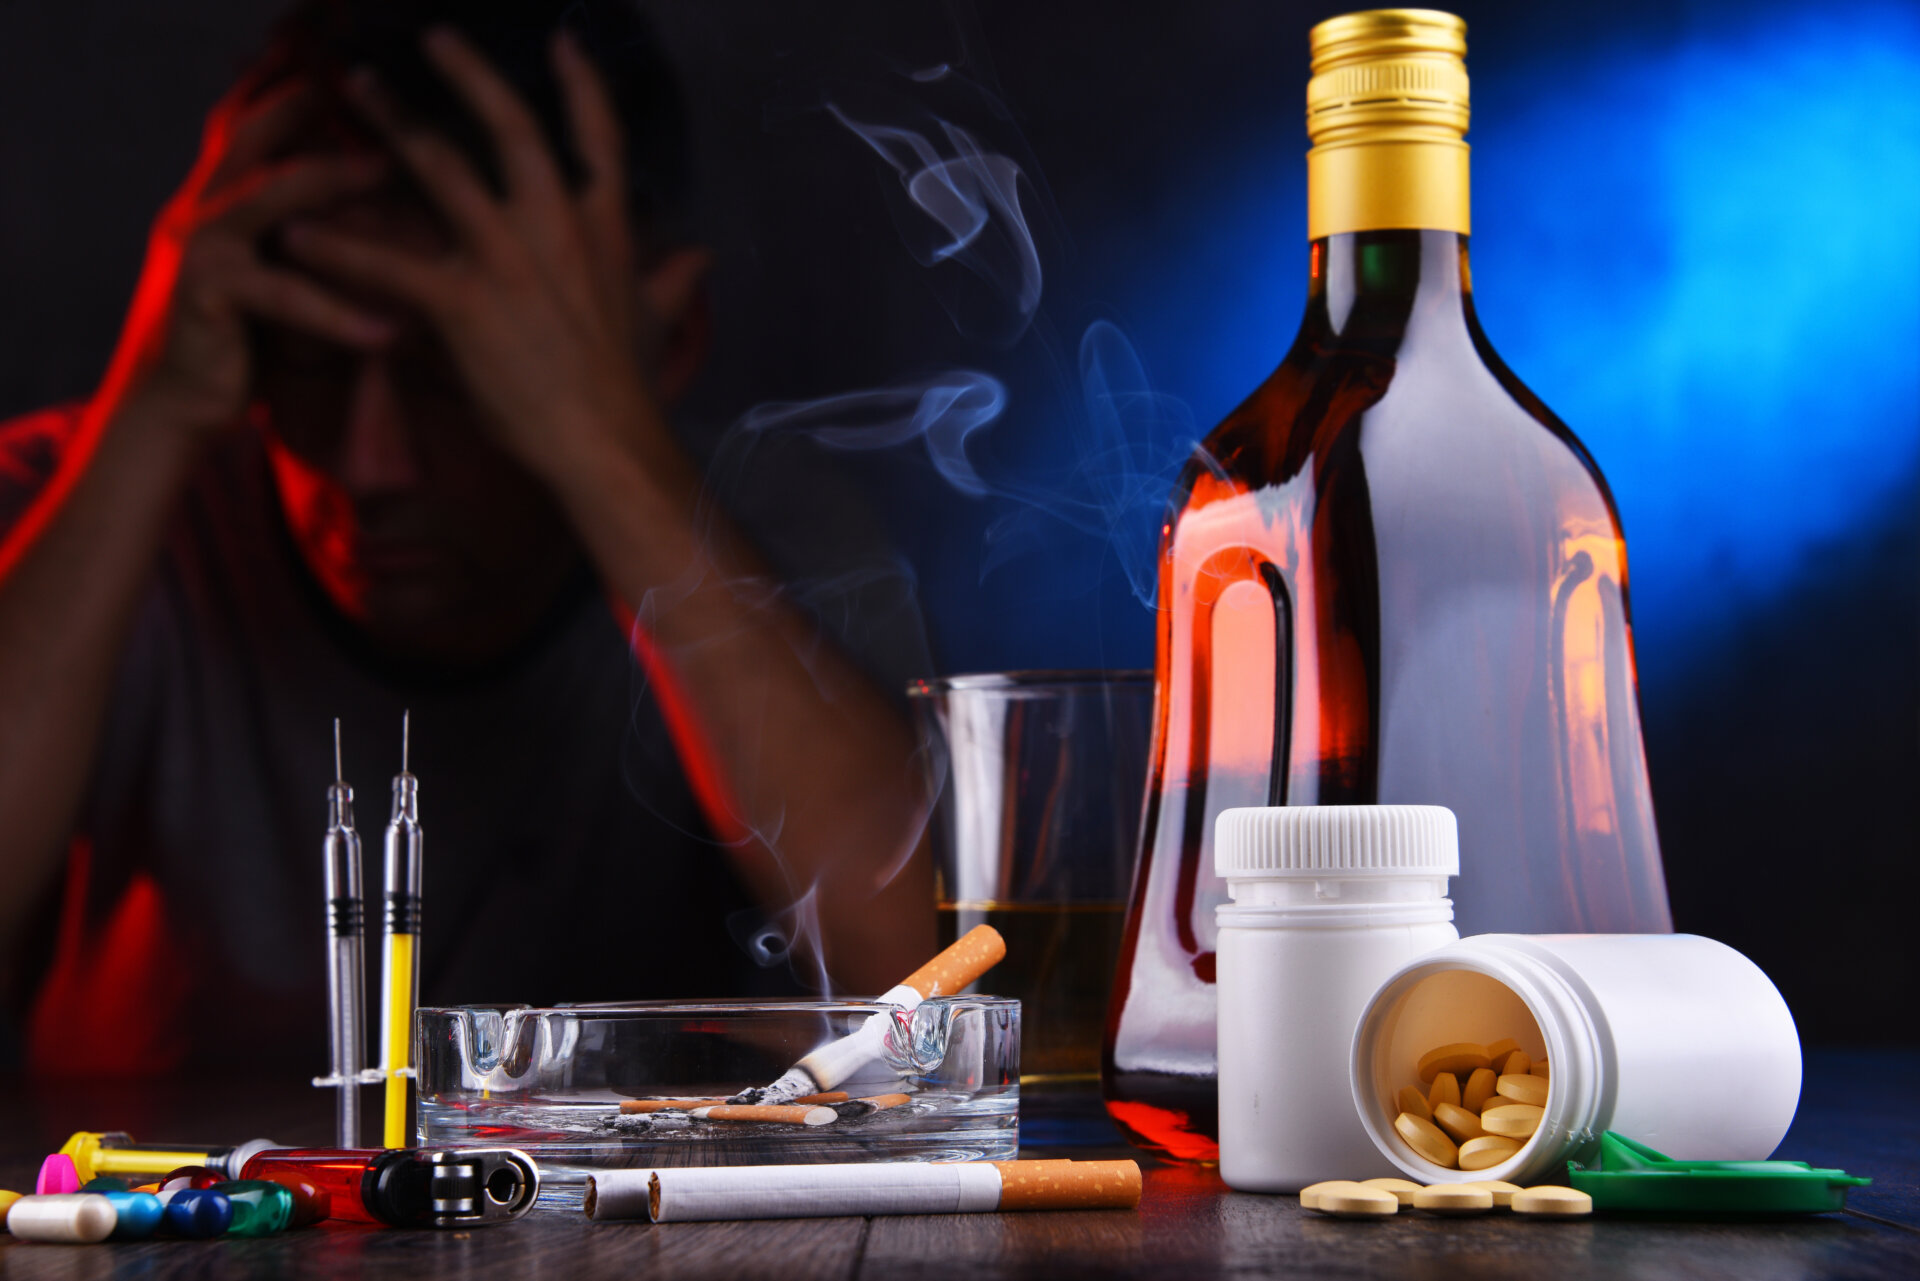 Addictive substances and the figure of a addicted man